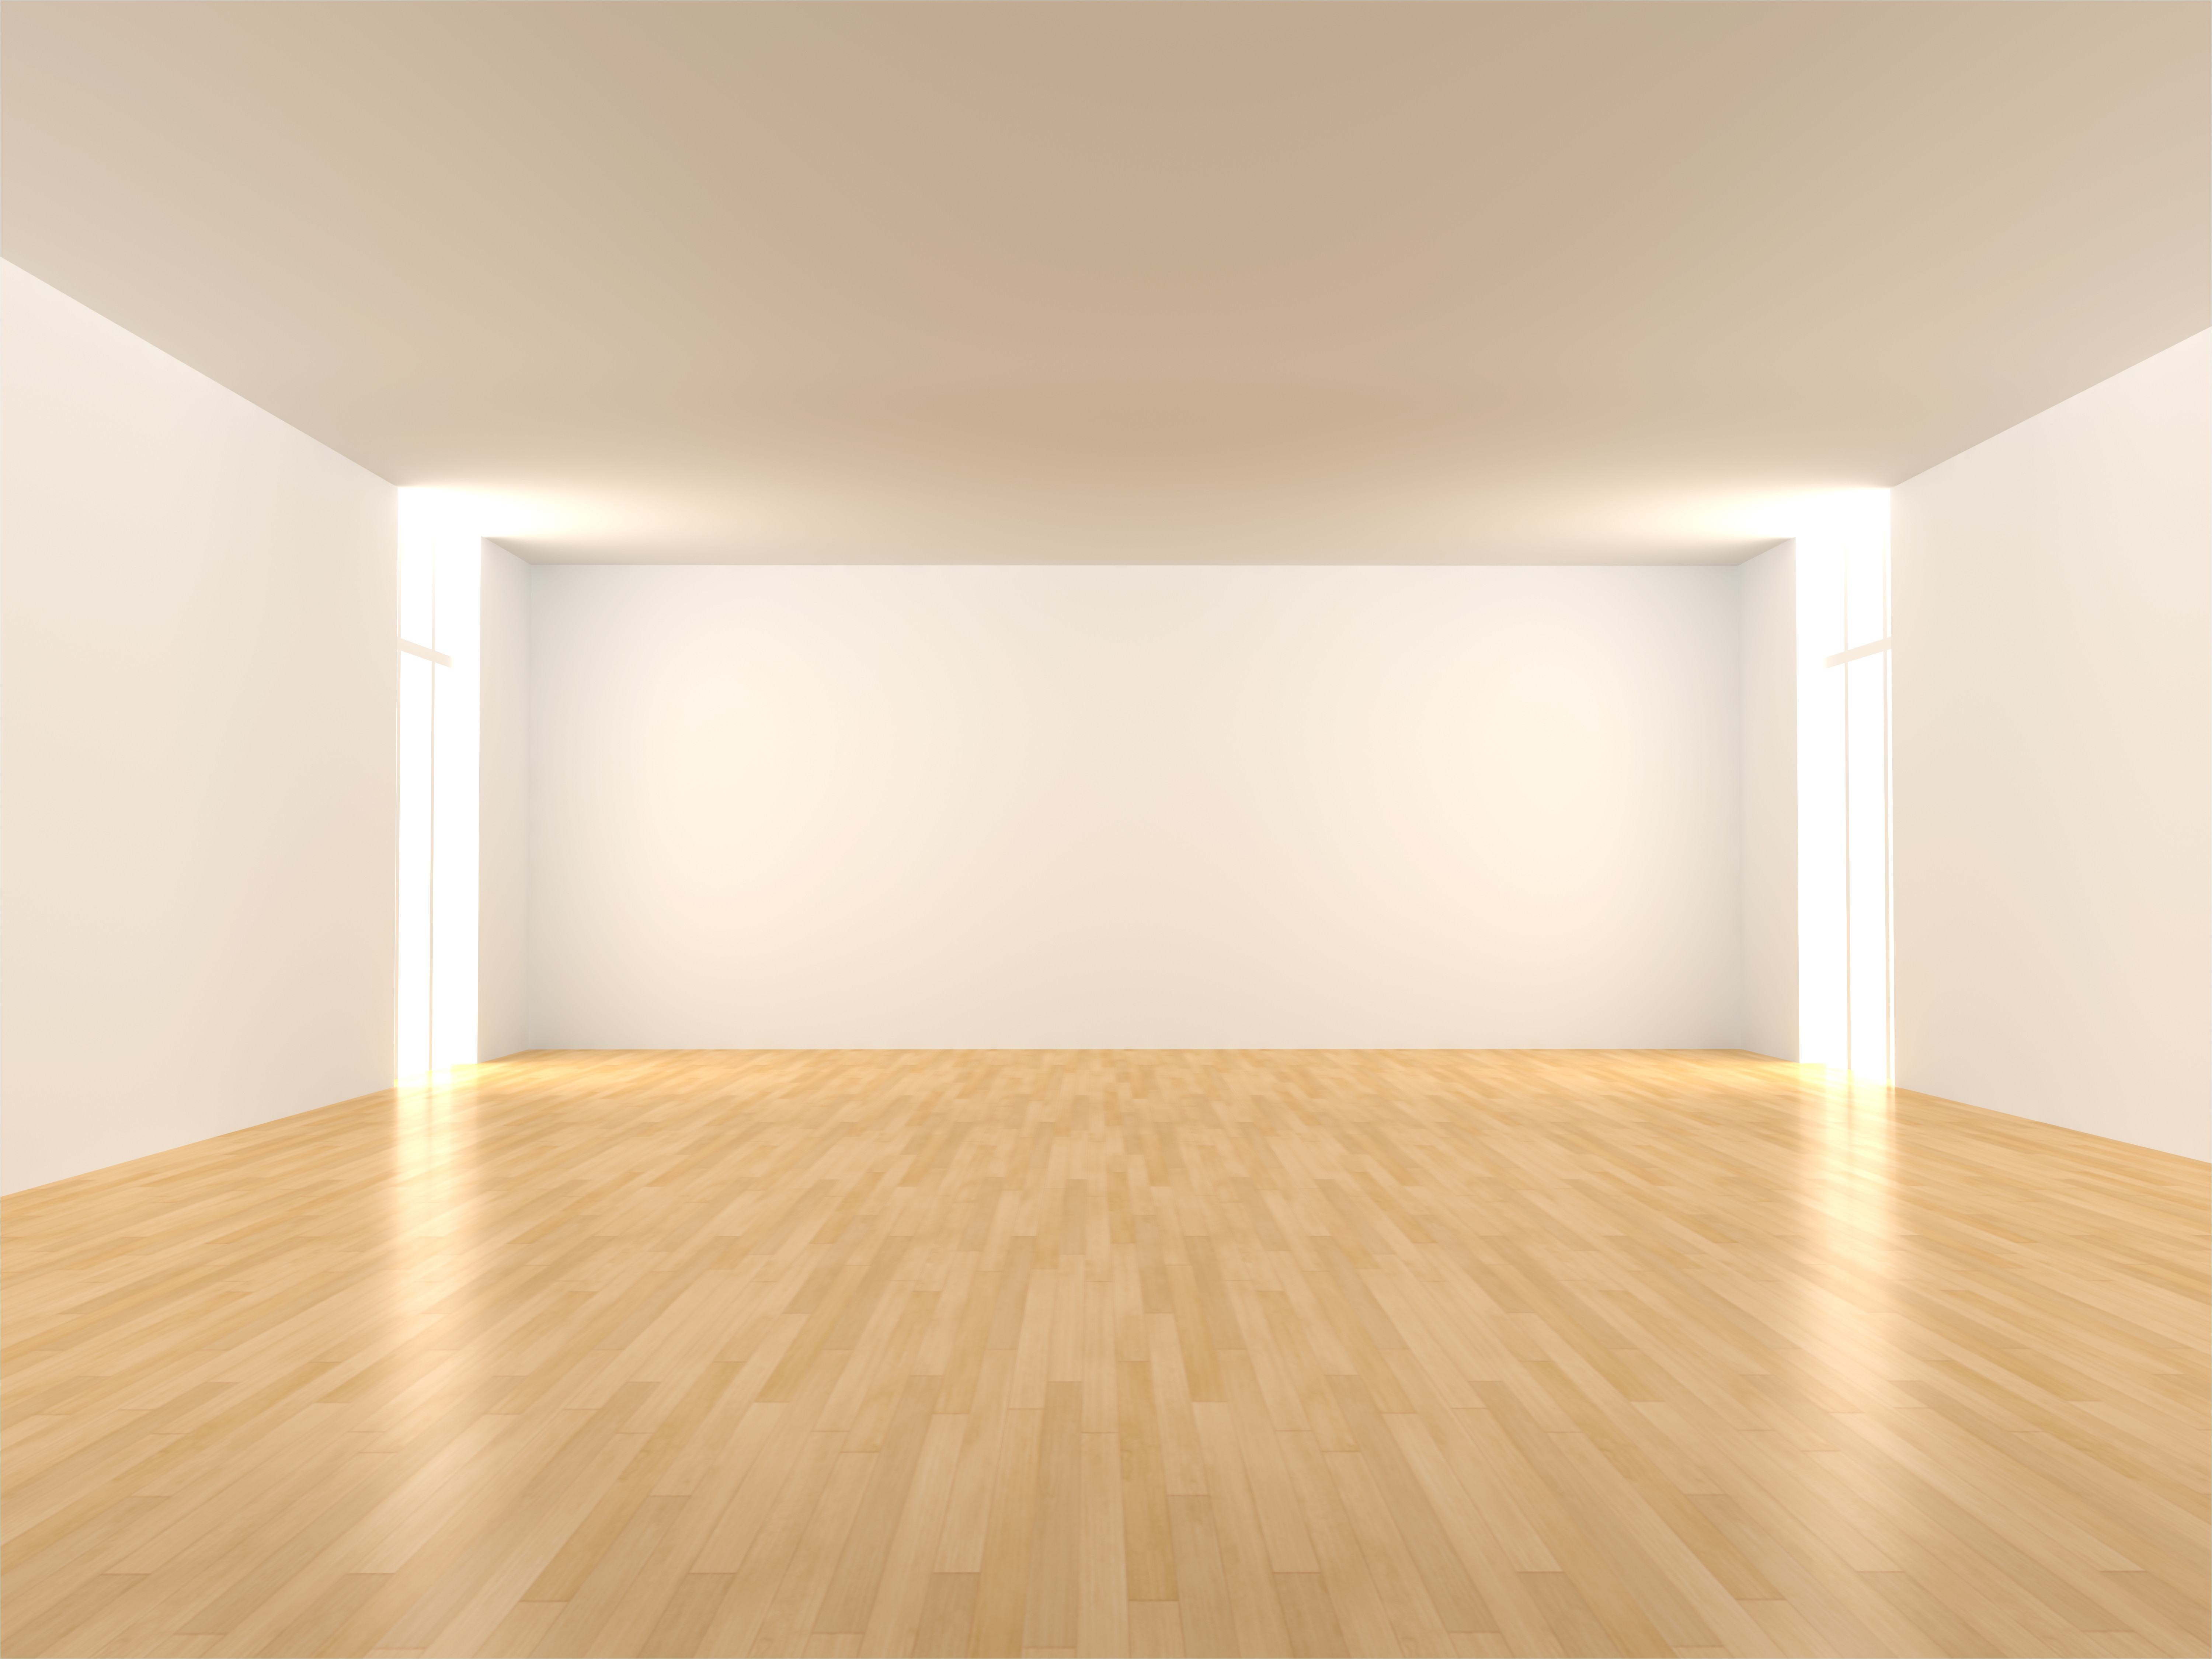 25 images of empty room template download 6114